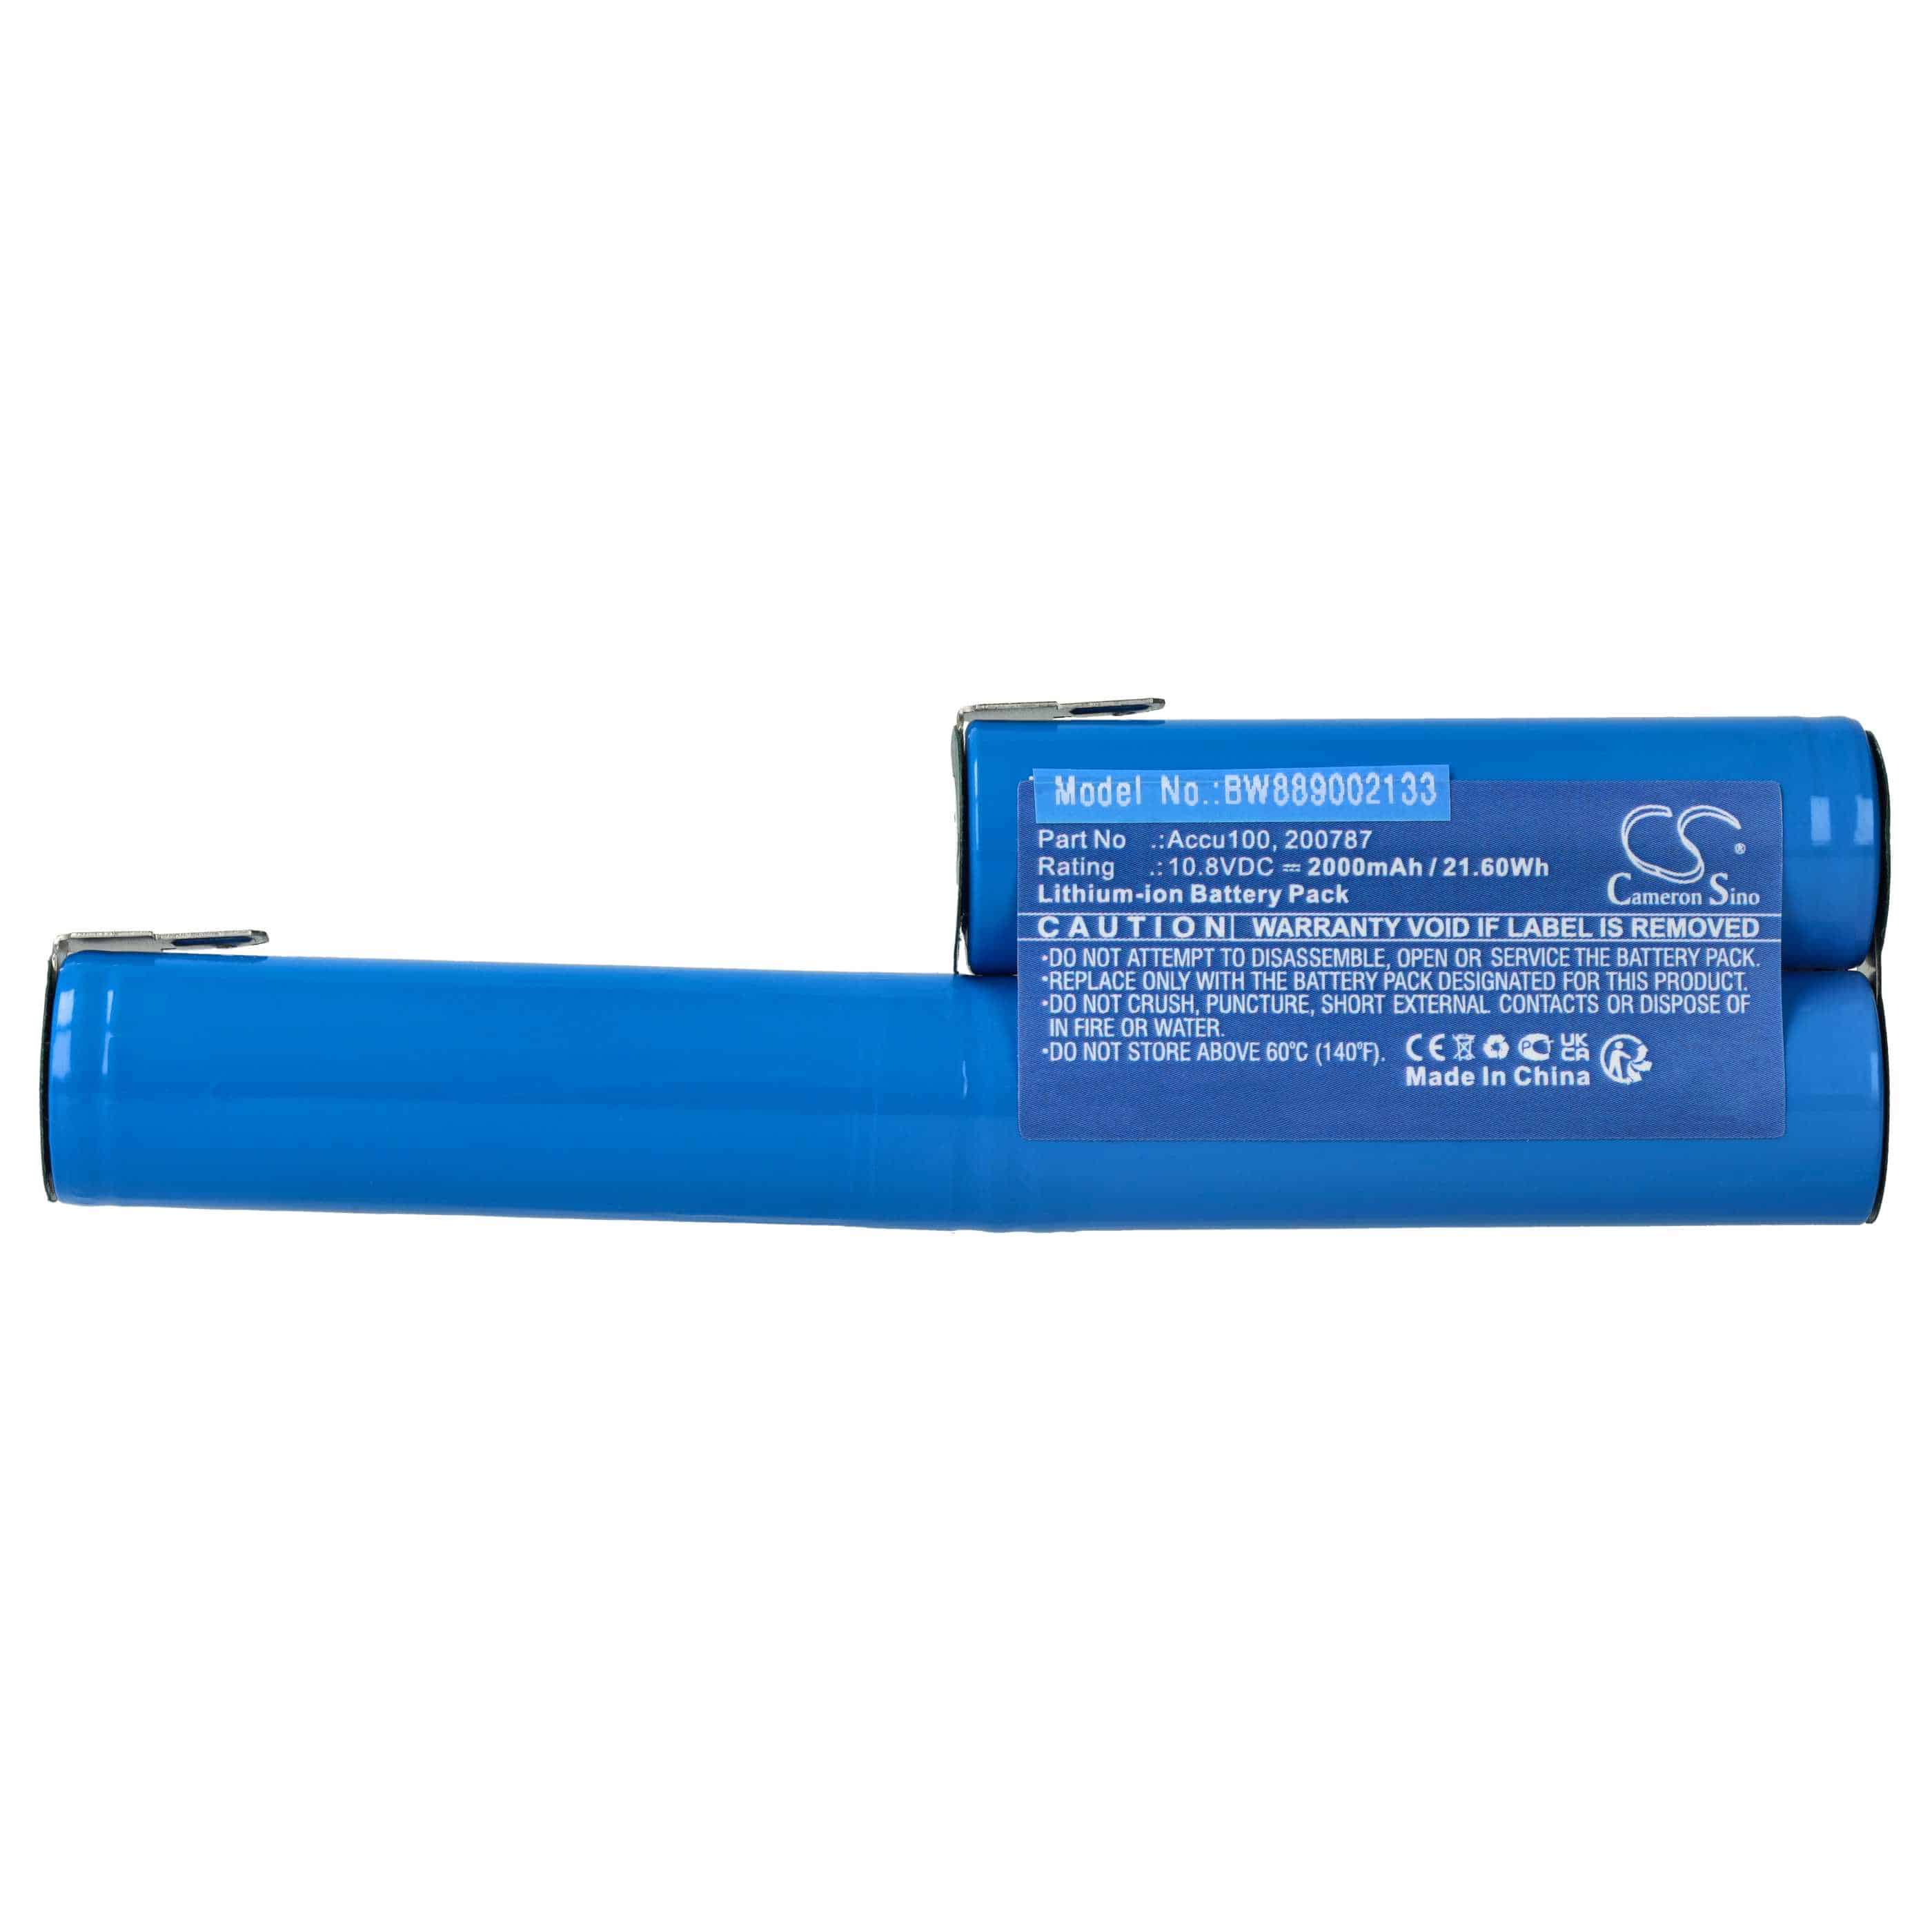 Lawnmower Battery Replacement for Bosch 08830-00.640.00, 08804-00.640.00 - 4200mAh 11.1V Li-Ion